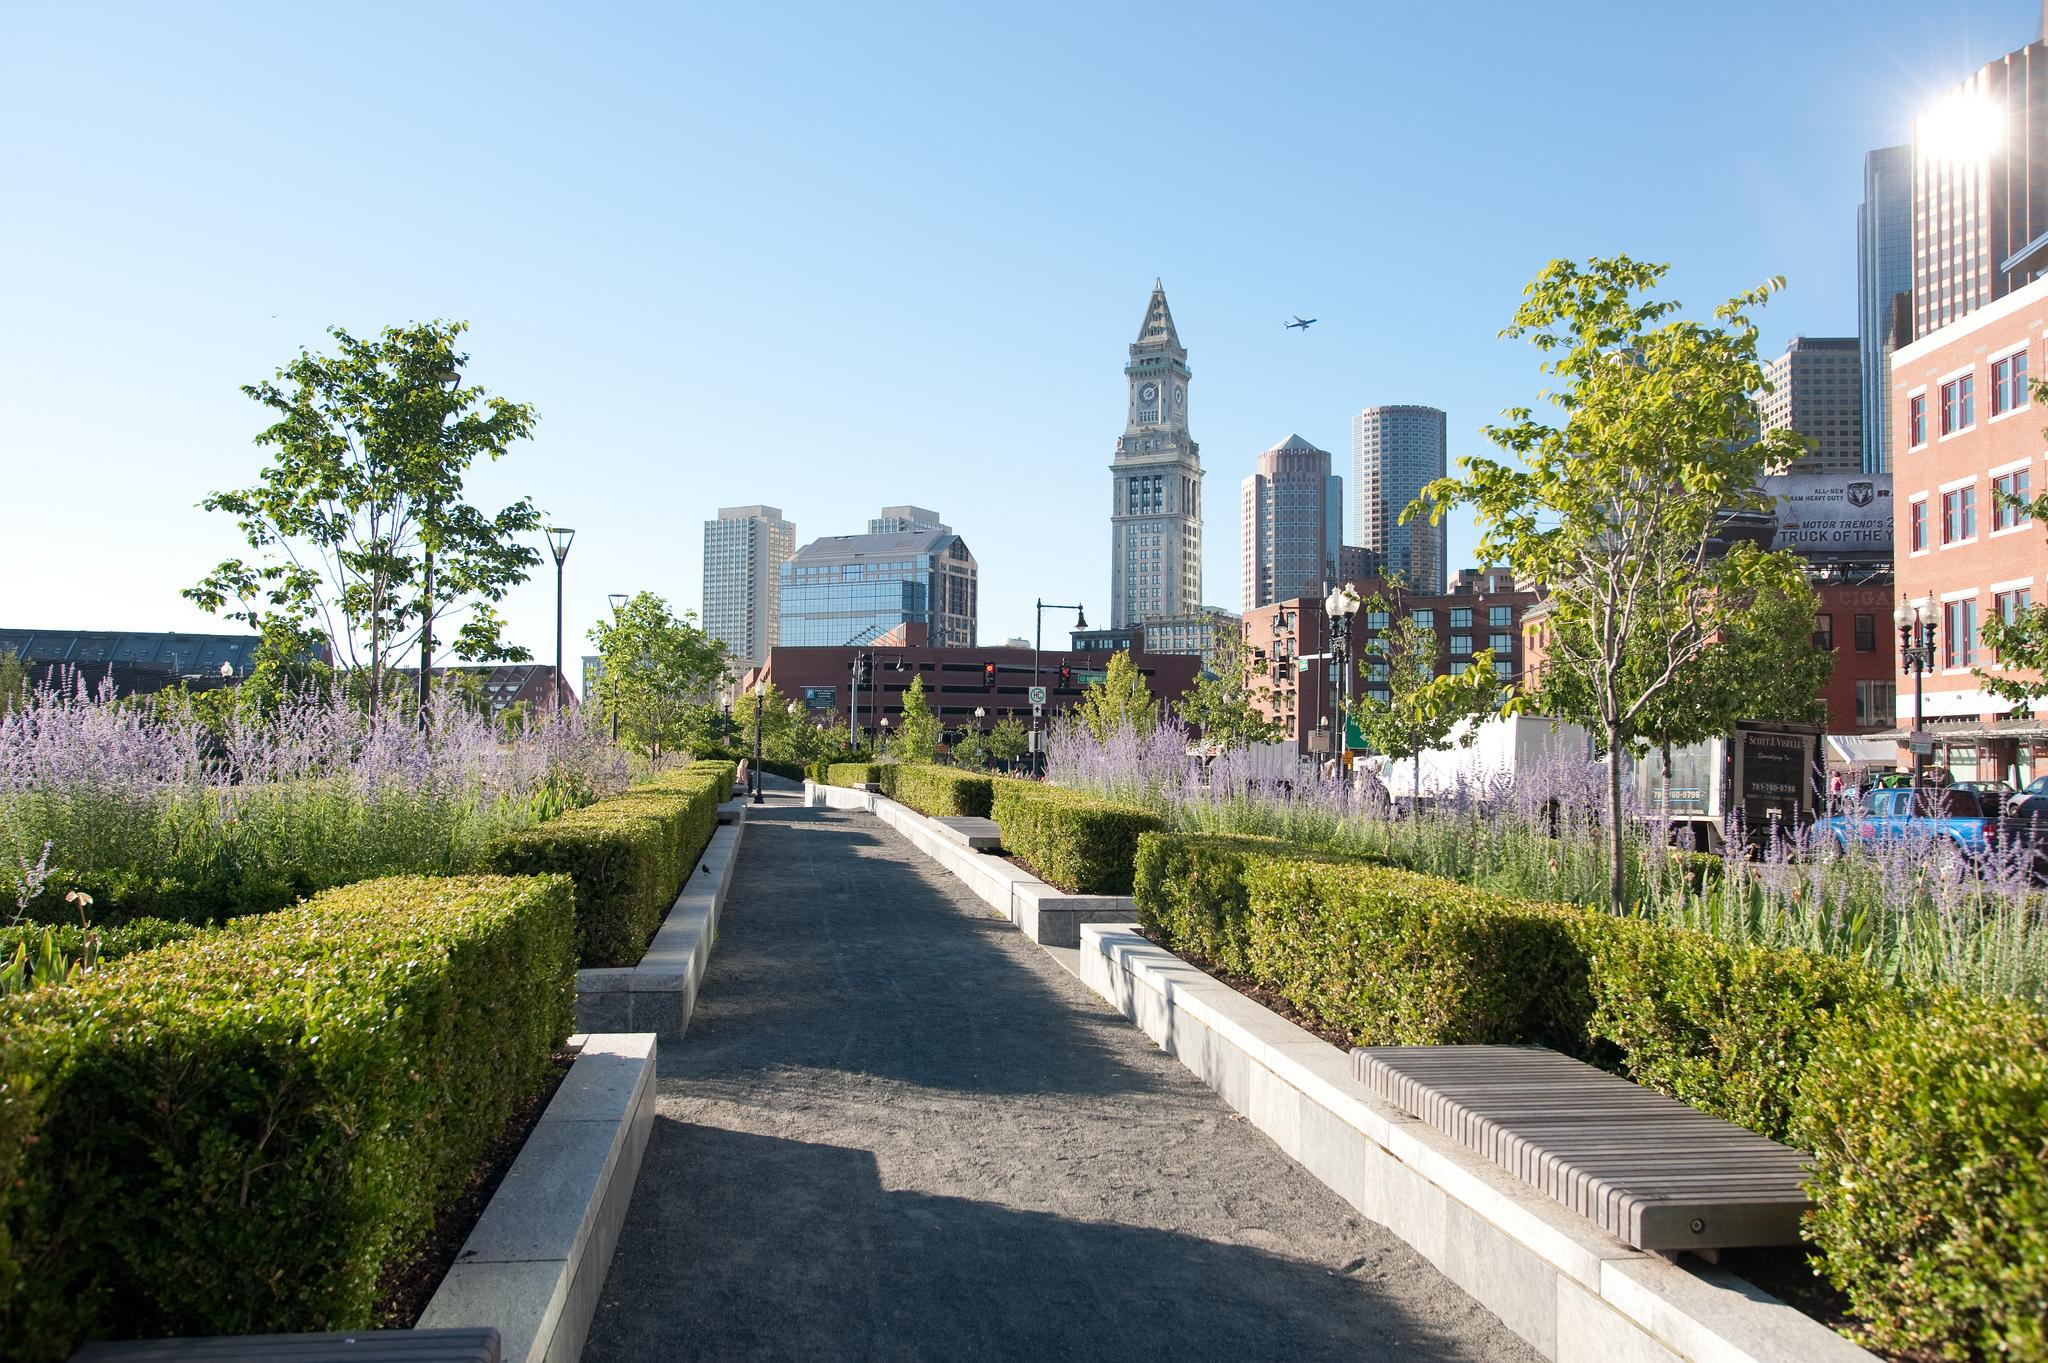 The Rose Kennedy Greenway makes for a pleasant stroll through the city